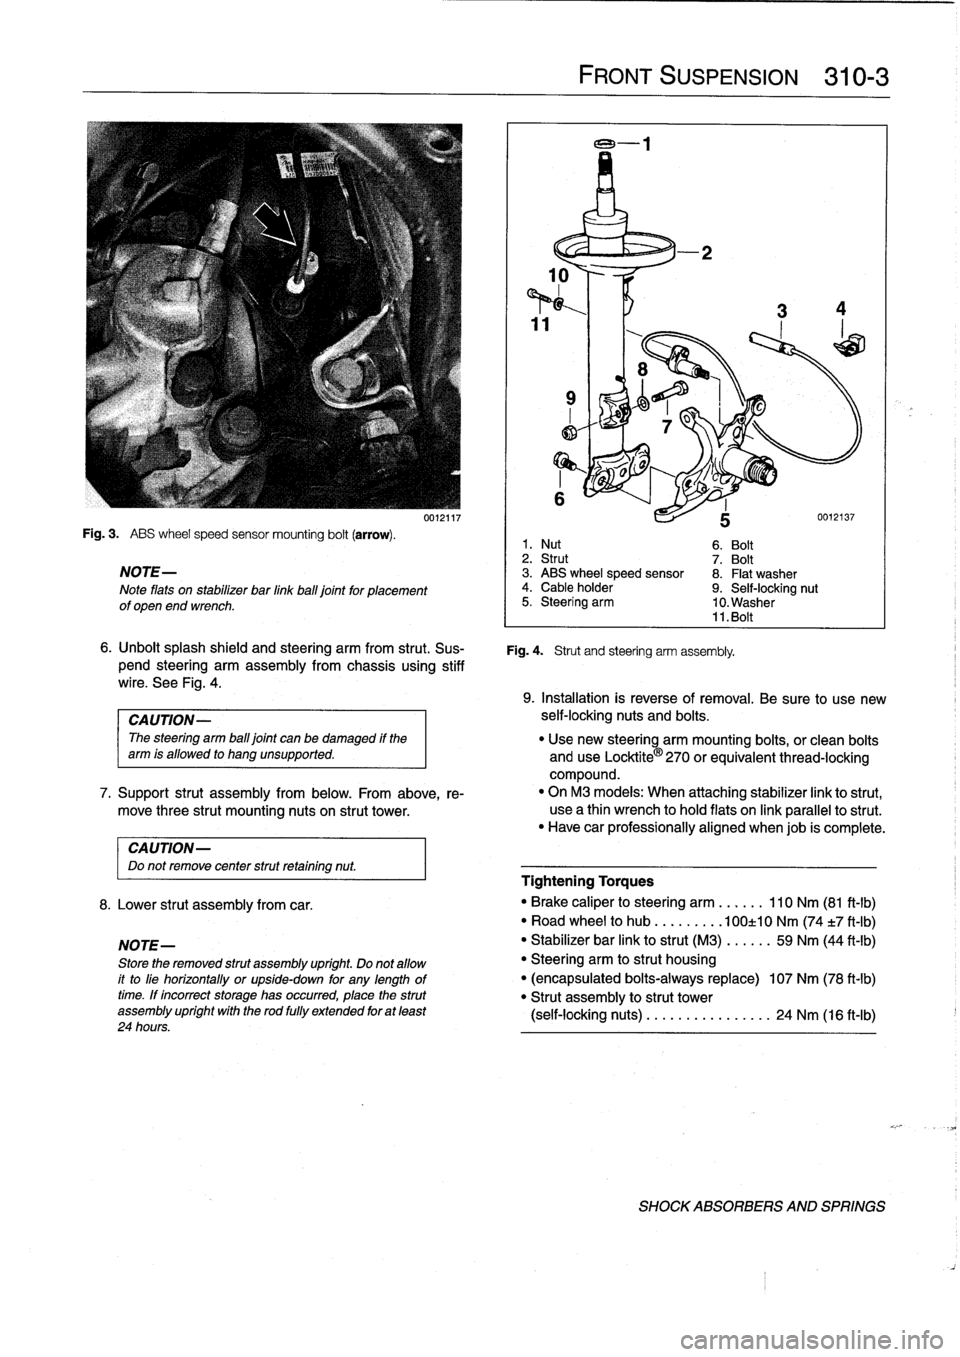 BMW 323i 1995 E36 Workshop Manual 
Fig
.
3
.

	

ABS
wheel
speed
sensor
mounting
bolt
(arrow)
.

NOTE-

Note
flats
on
stabilizer
bar
linkball
joint
for
placement
of
open
end
wrench
.

CAUTION-
Do
not
remove
center
strut
retaining
nut
